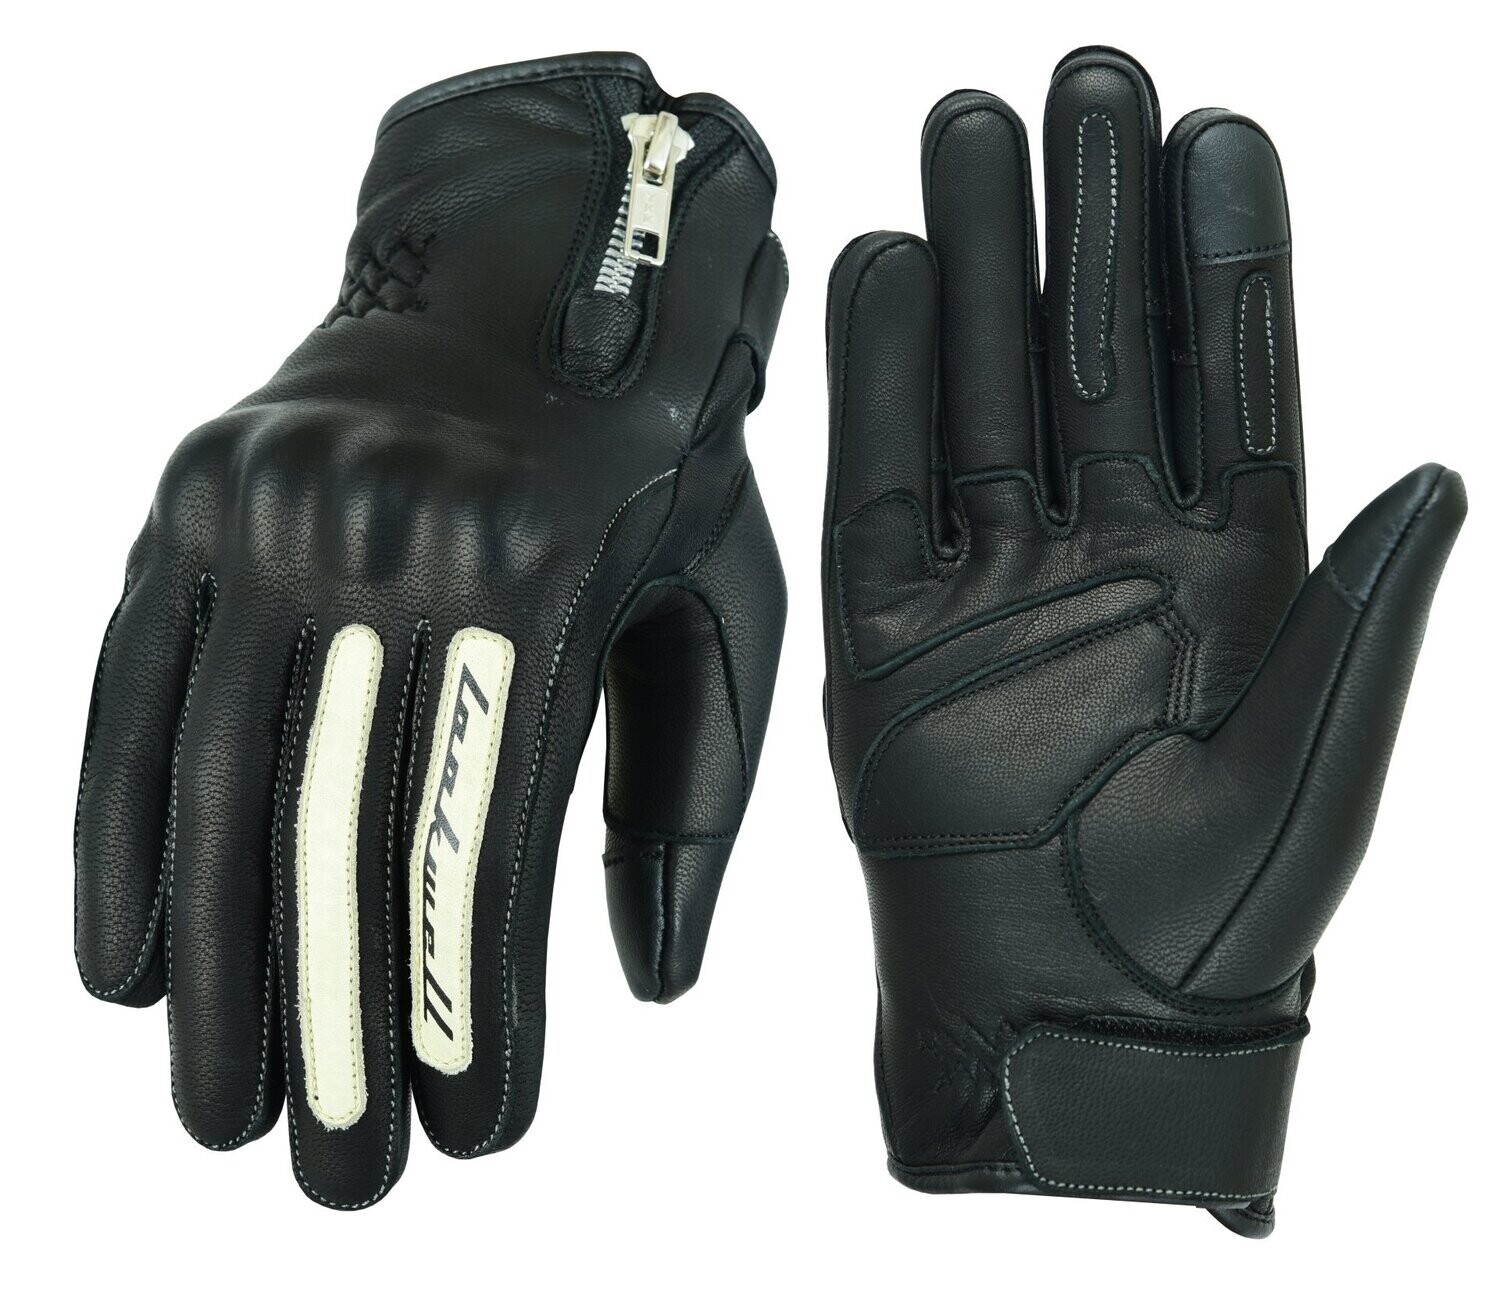 Lookwell Indiana Gloves